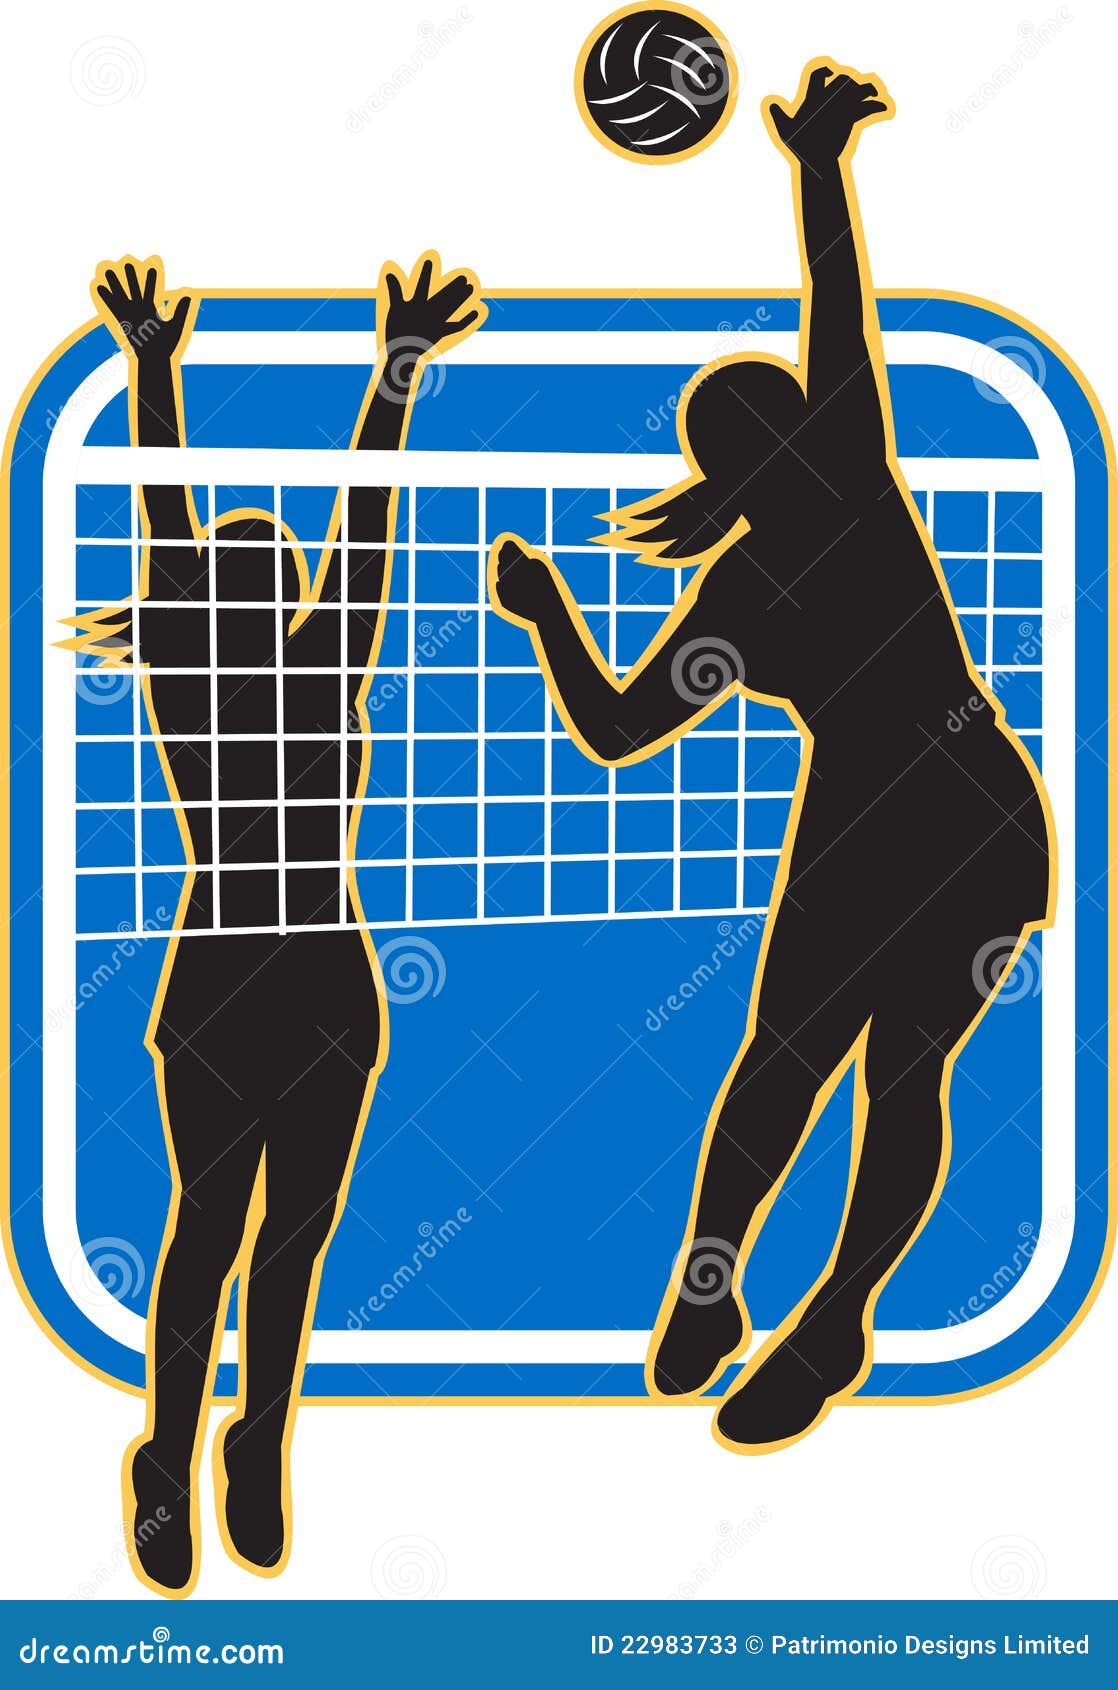 volleyball hitter clipart - photo #36